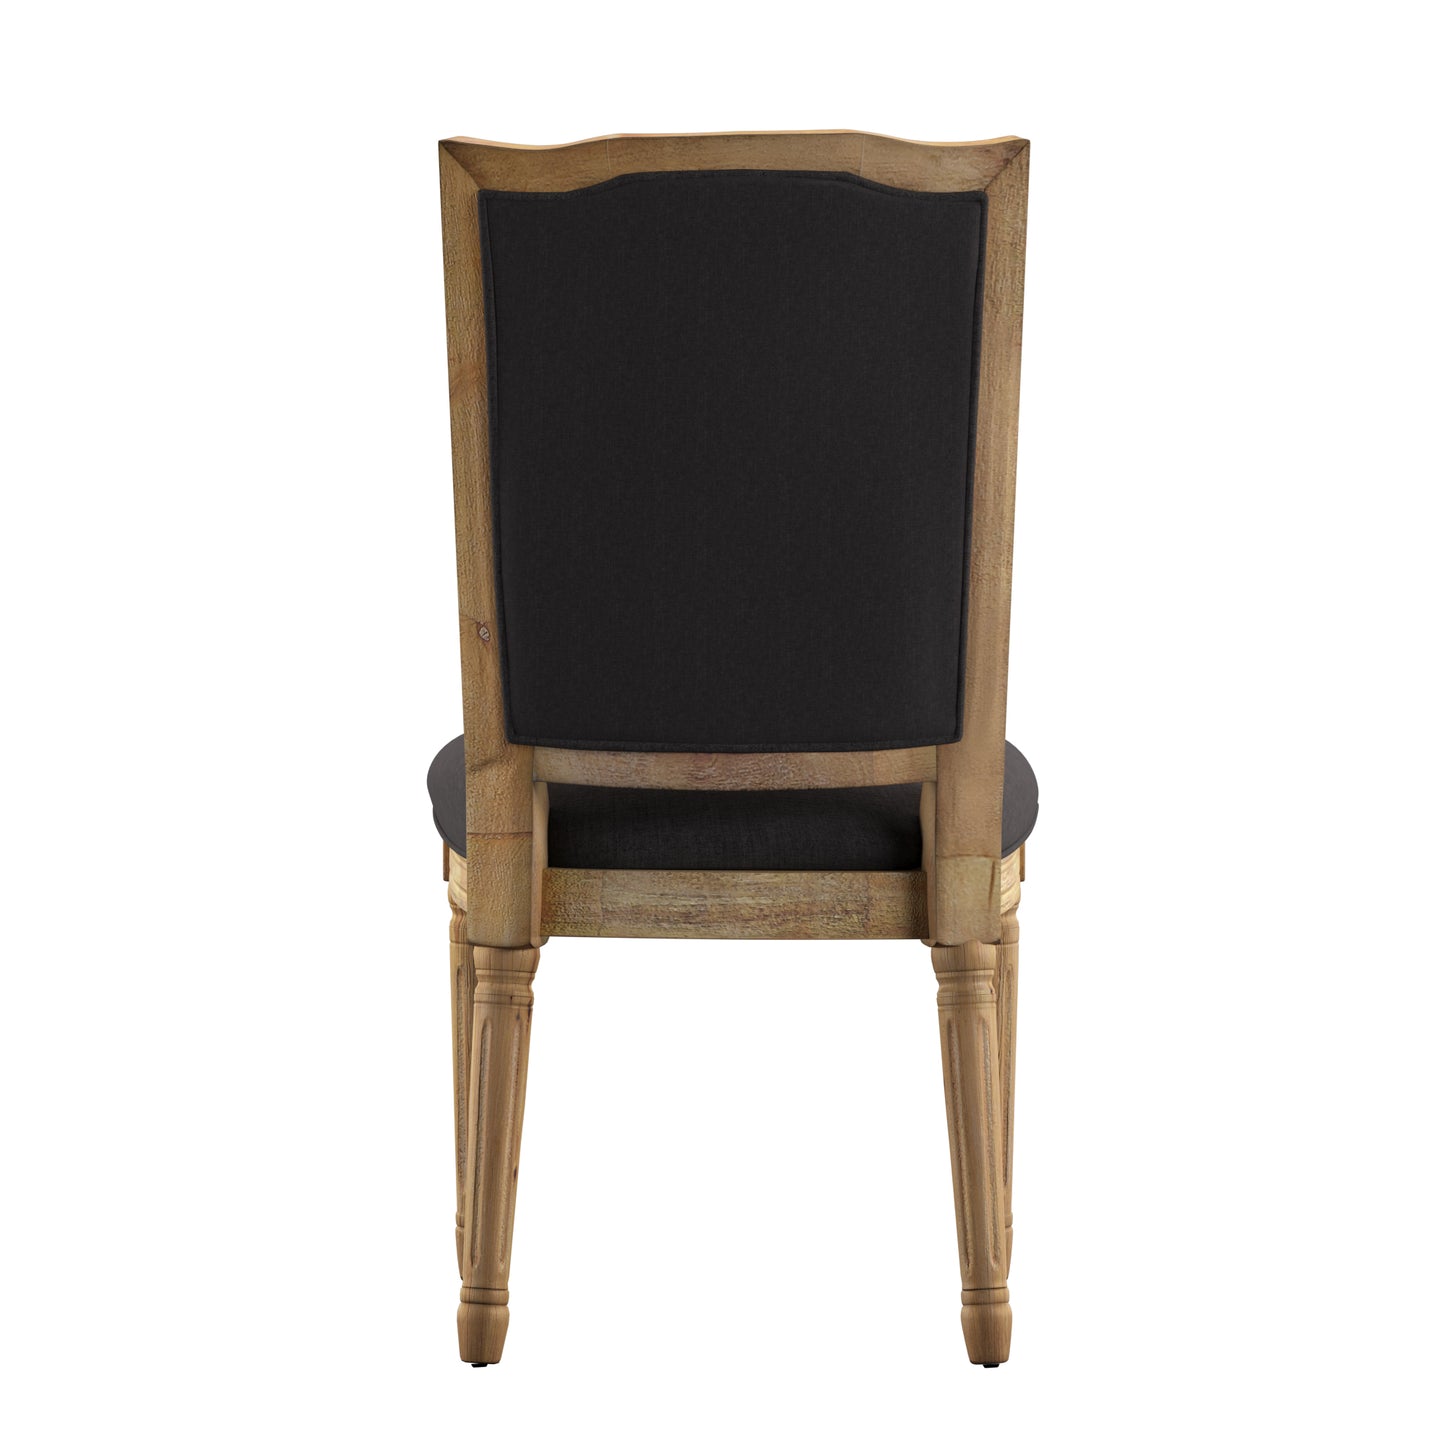 Ornate Linen and Wood Dining Chairs (Set of 2) - Dark Grey Linen, Natural Finish